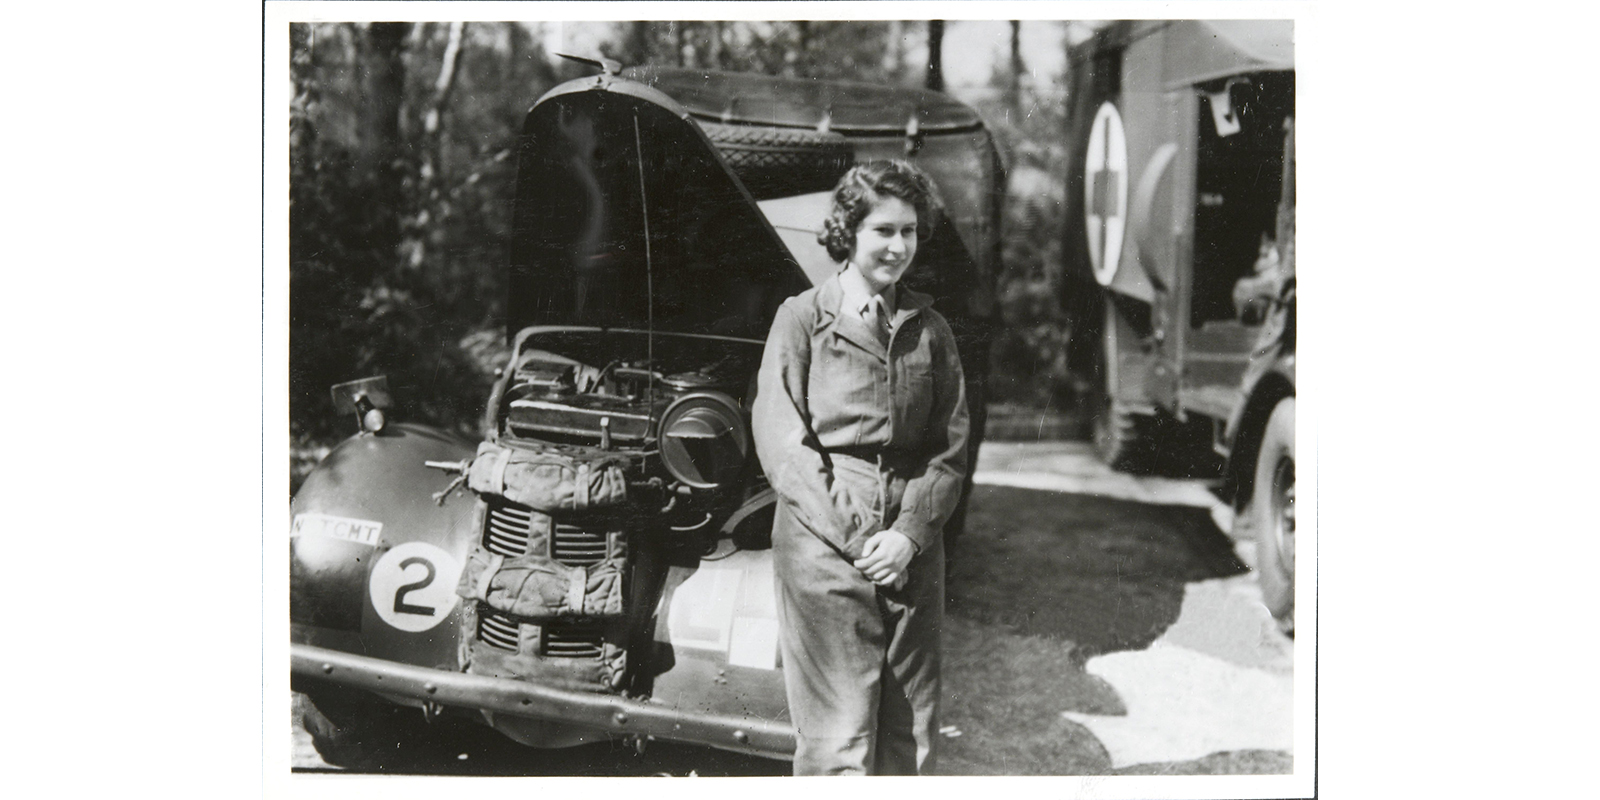 Princess Elizabeth leaning against the front wheel arch of a military vehicle, wearing a boiler suit. The bonnet of the vehicle is up, indicating that she has been maintaining it. A medical lorry is partially visible to the viewer’s right, adorned with a medical cross ‘+’ symbol on the side.